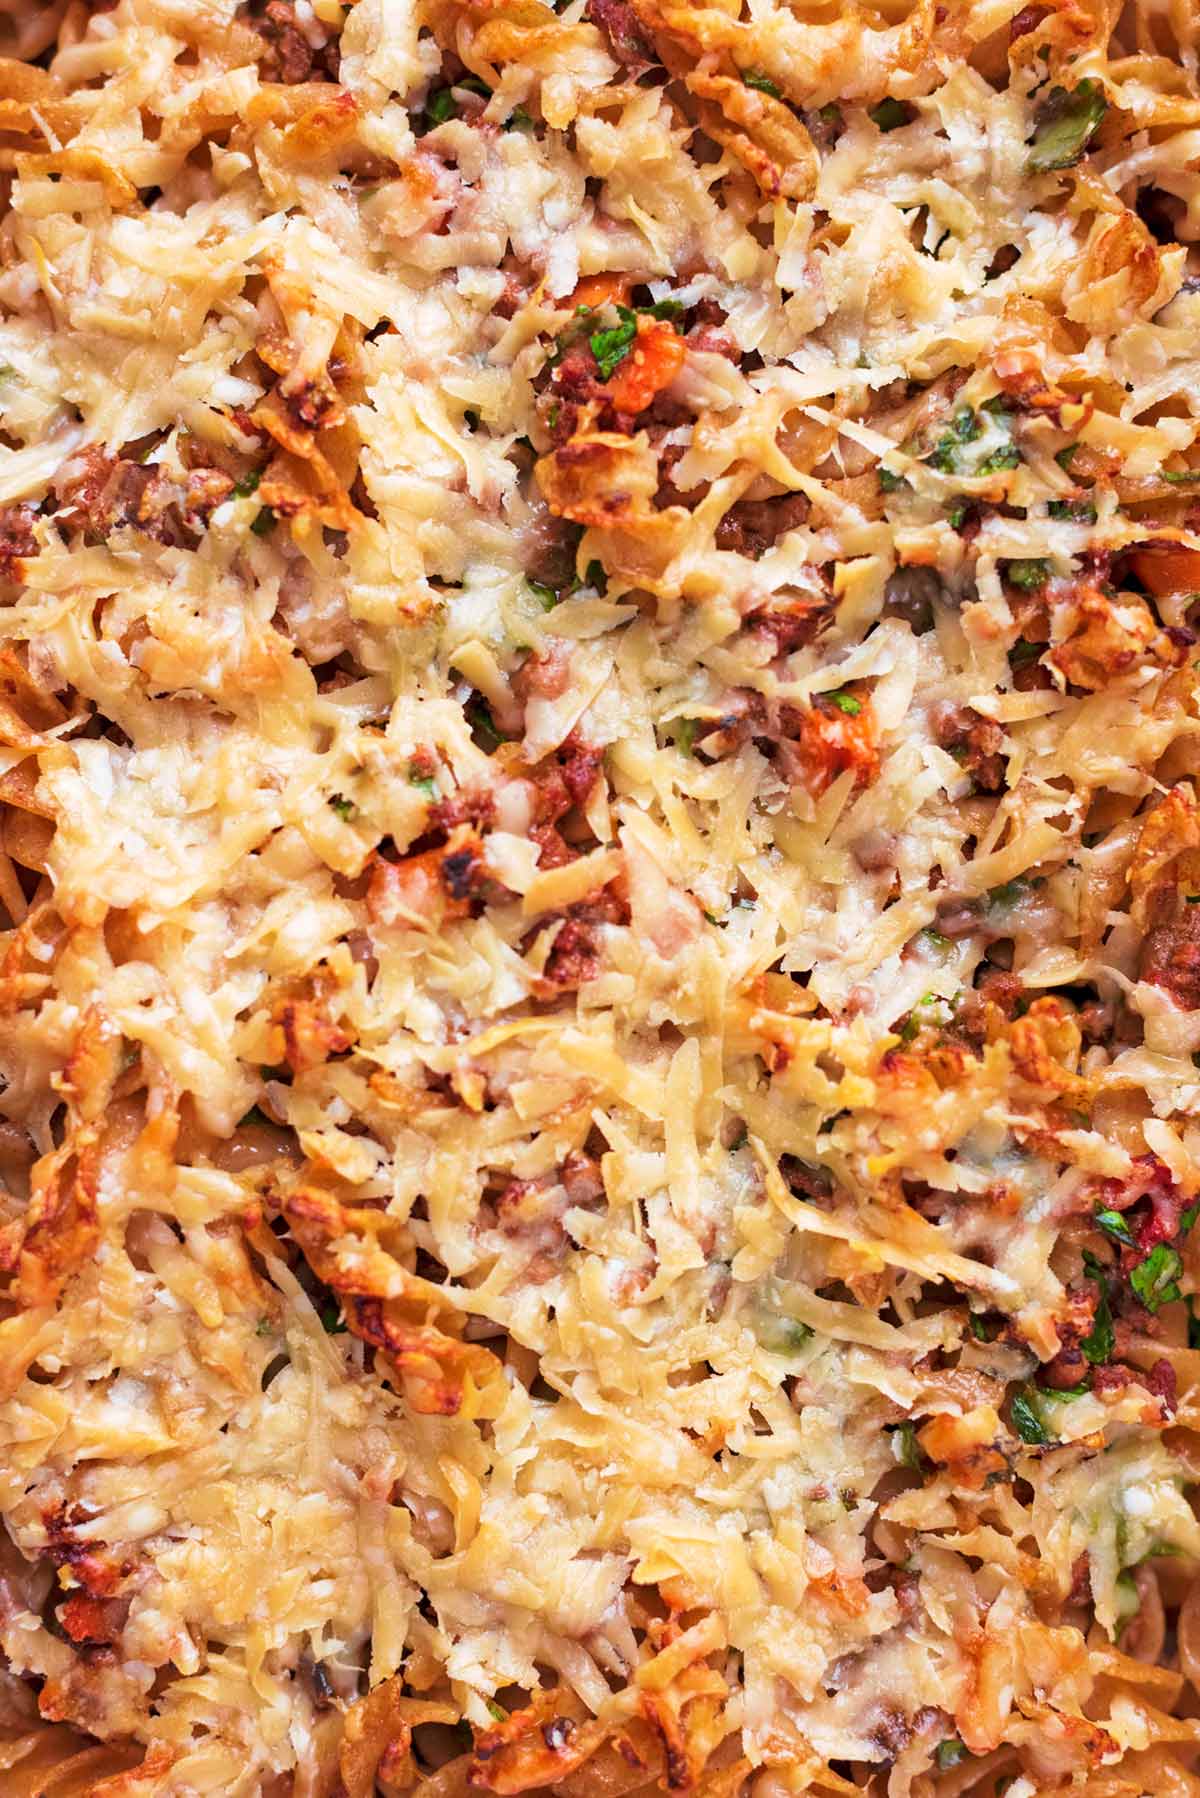 Grated cheese covering a pasta bake.